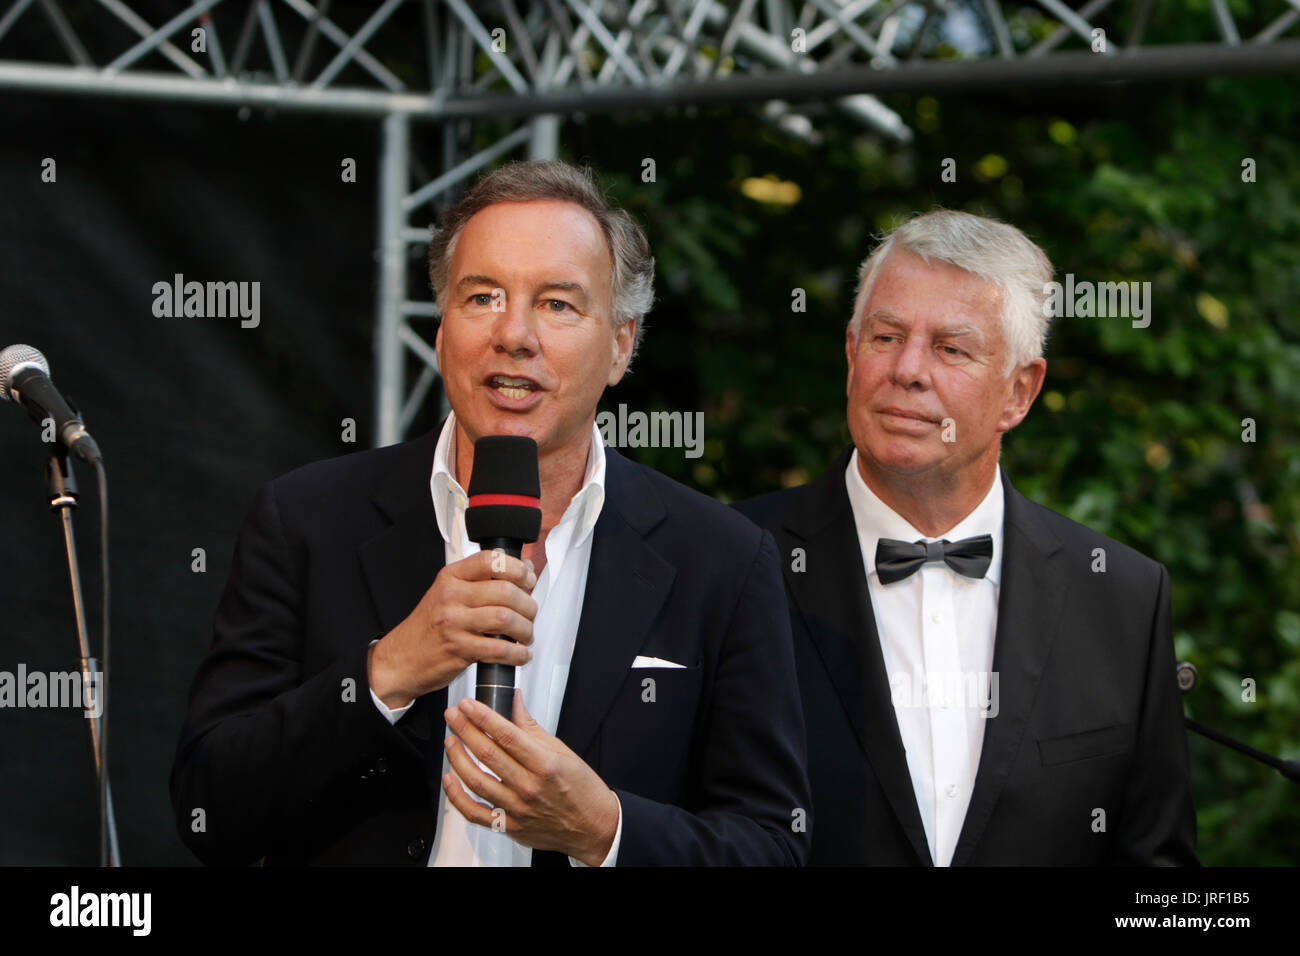 Worms, Germany. 4th August 2017. Nico Hofmann (left), the intendant of the Nibelung Festival, and Michael Kissel, the Lord Mayor of Worms, address the reception ahead of the premiere. Actors, politicians and other VIPs attended the opening night of the 2017 Nibelung Festival in Worms. The play in the 16. Season of the festival is called ‘Glow - Siegfried of Arabia’ from Albert Ostermaier. Credit: Michael Debets/Alamy Live News Stock Photo